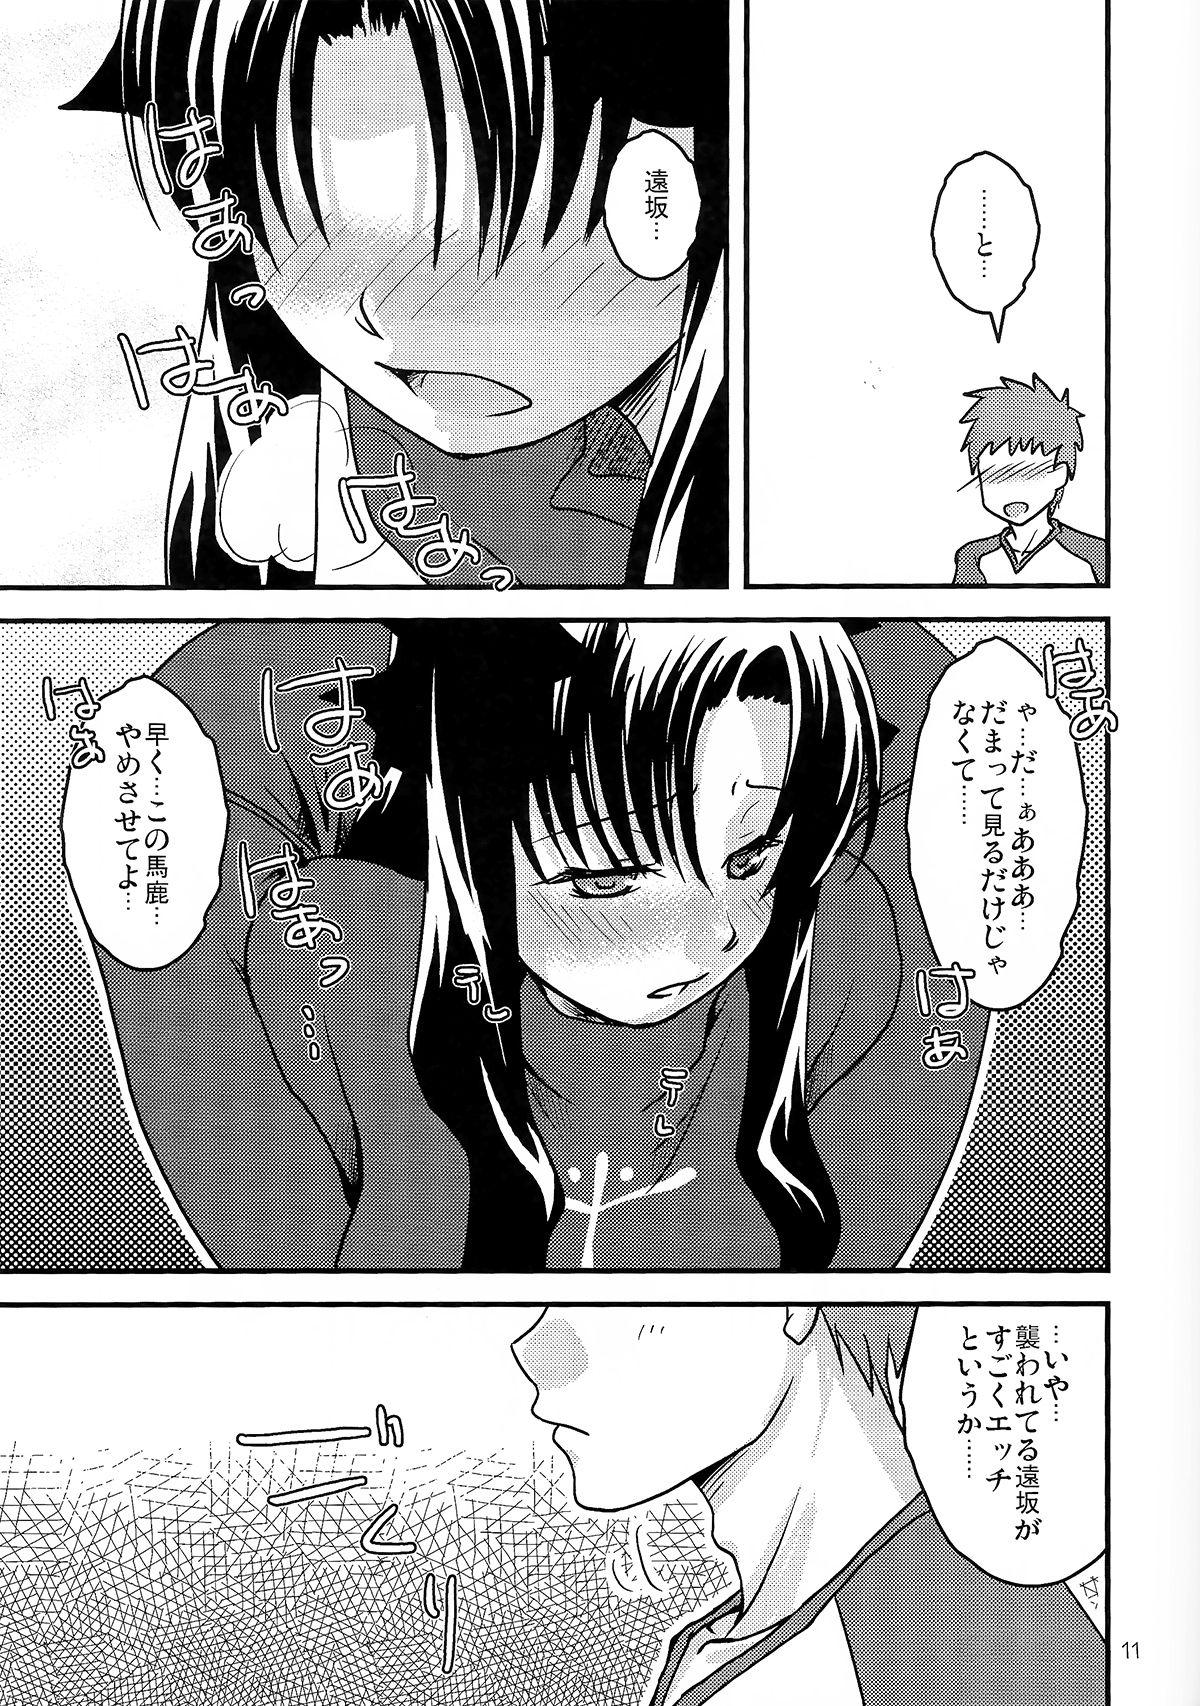 Spreadeagle Fakers - Fate stay night Couple Fucking - Page 10